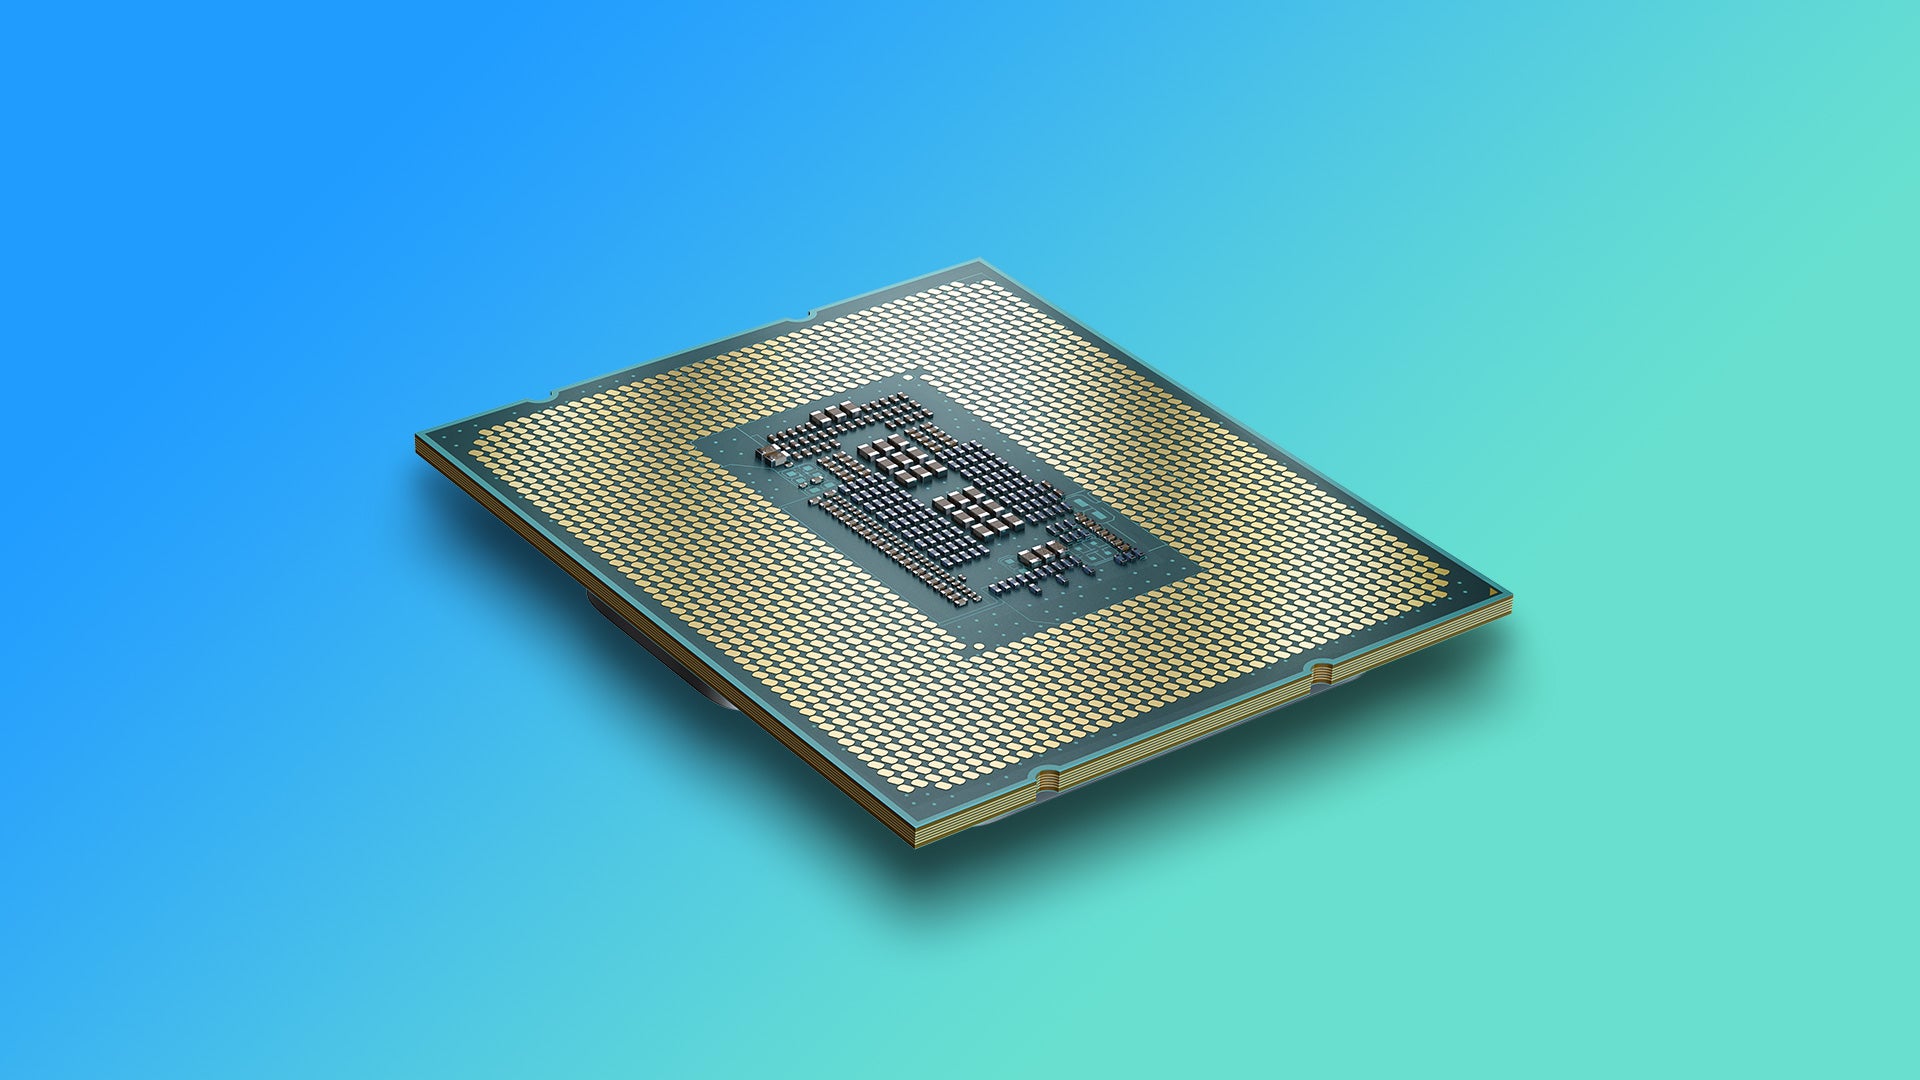 Intel Core i9 13900K and Core i5 13600K review: an effective